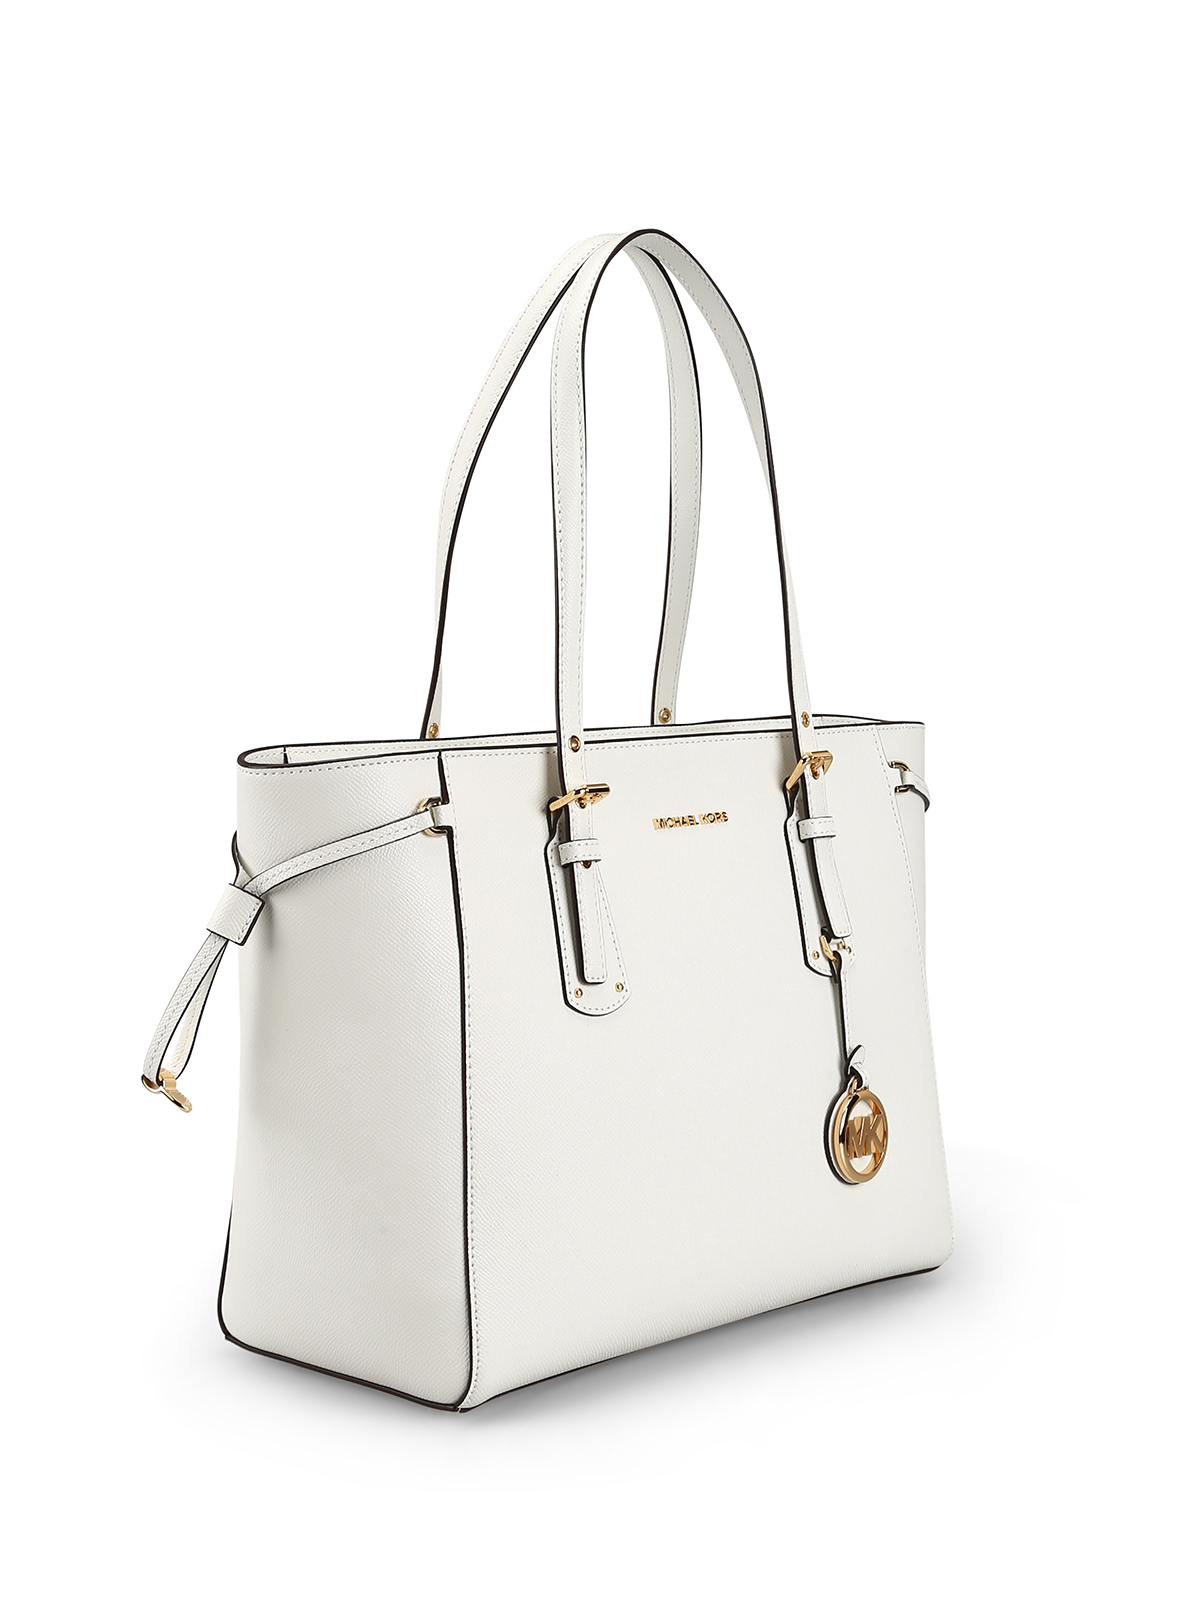 Voyager white leather medium tote 